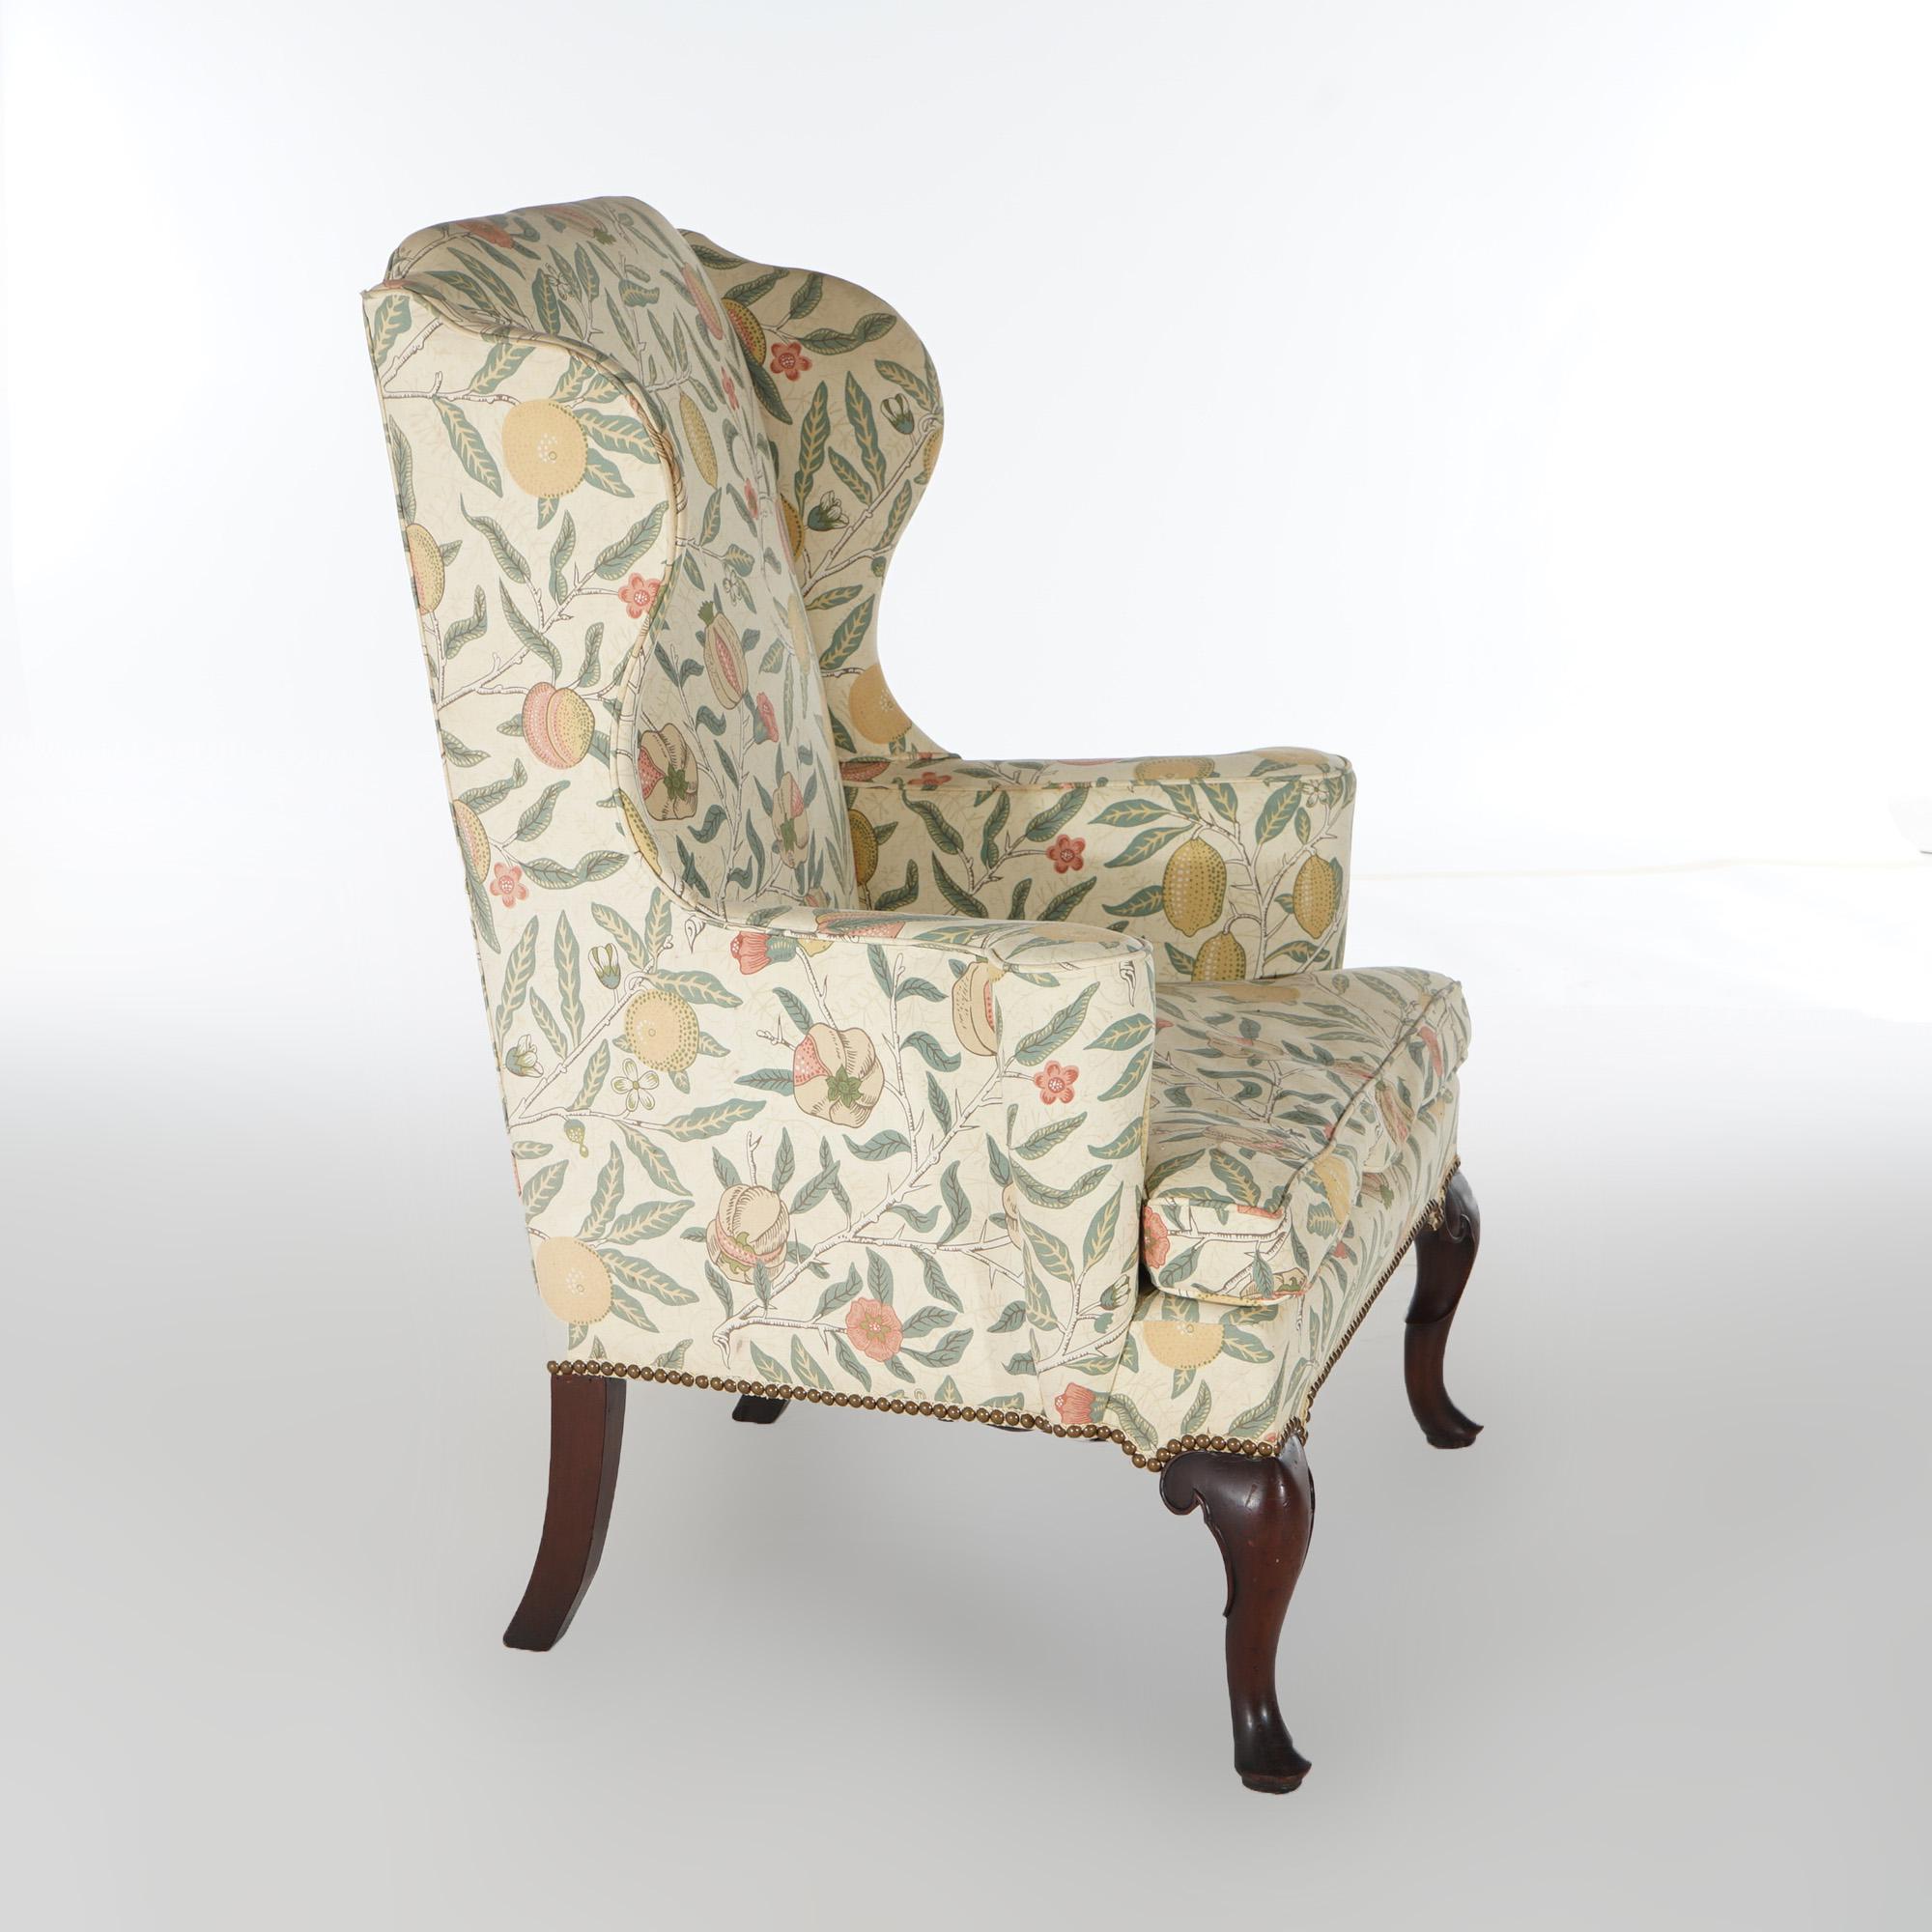 English Queen Anne Style Upholstered & Mahogany Fireside Wingback Chair 20th C For Sale 2